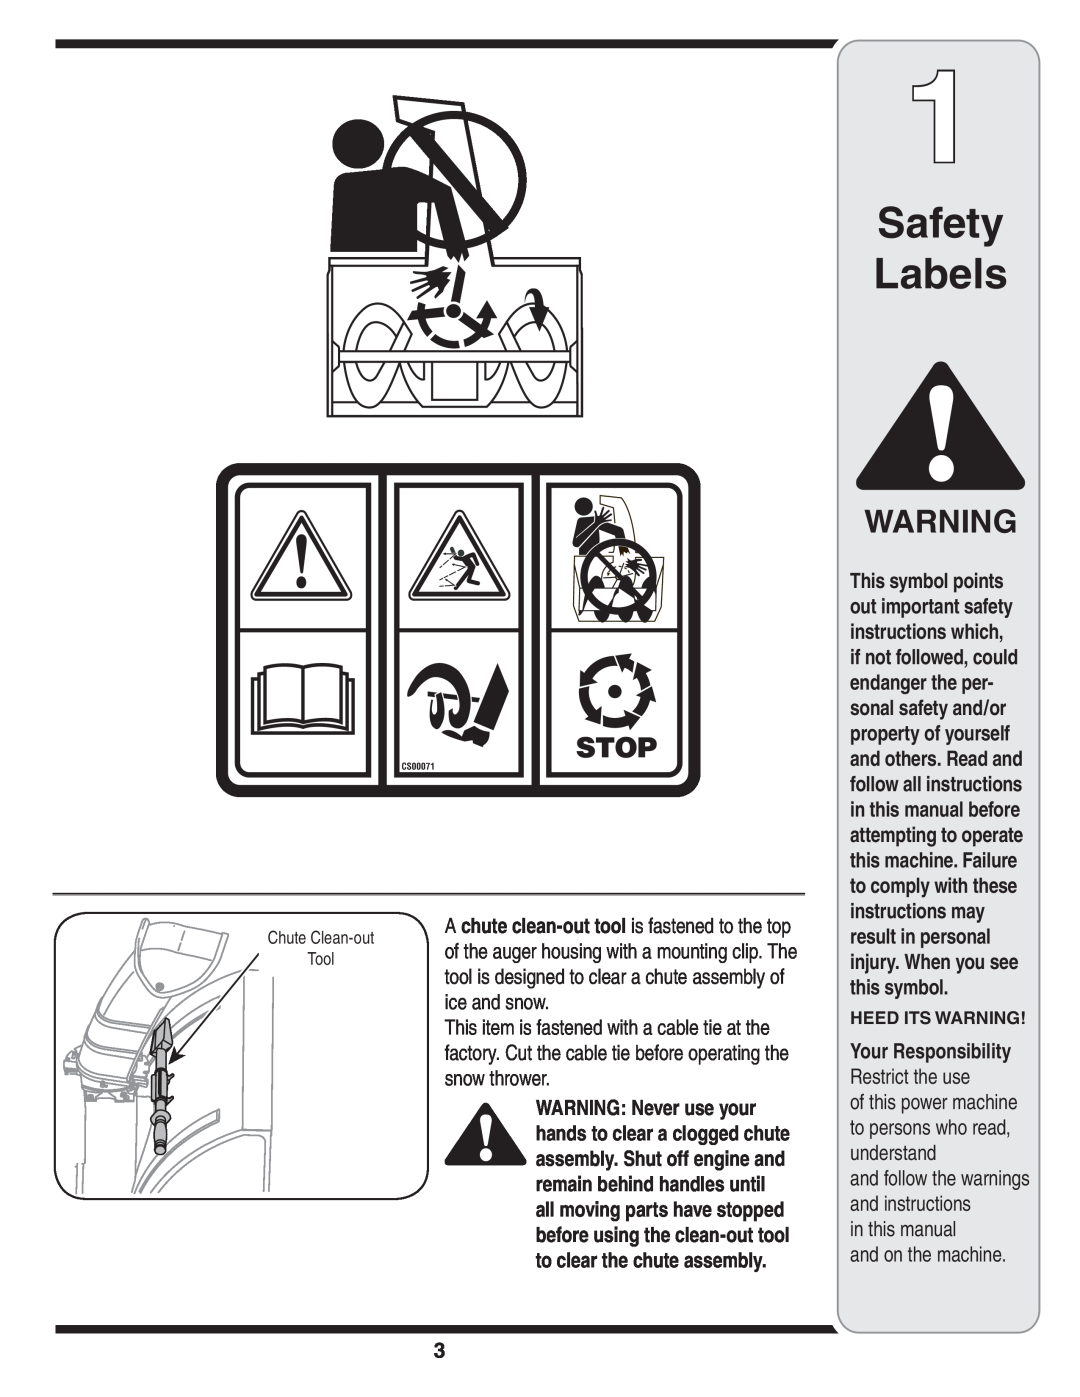 Troy-Bilt 772C0772 Safety Labels, in this manual and on the machine, result in personal injury. When you see this symbol 